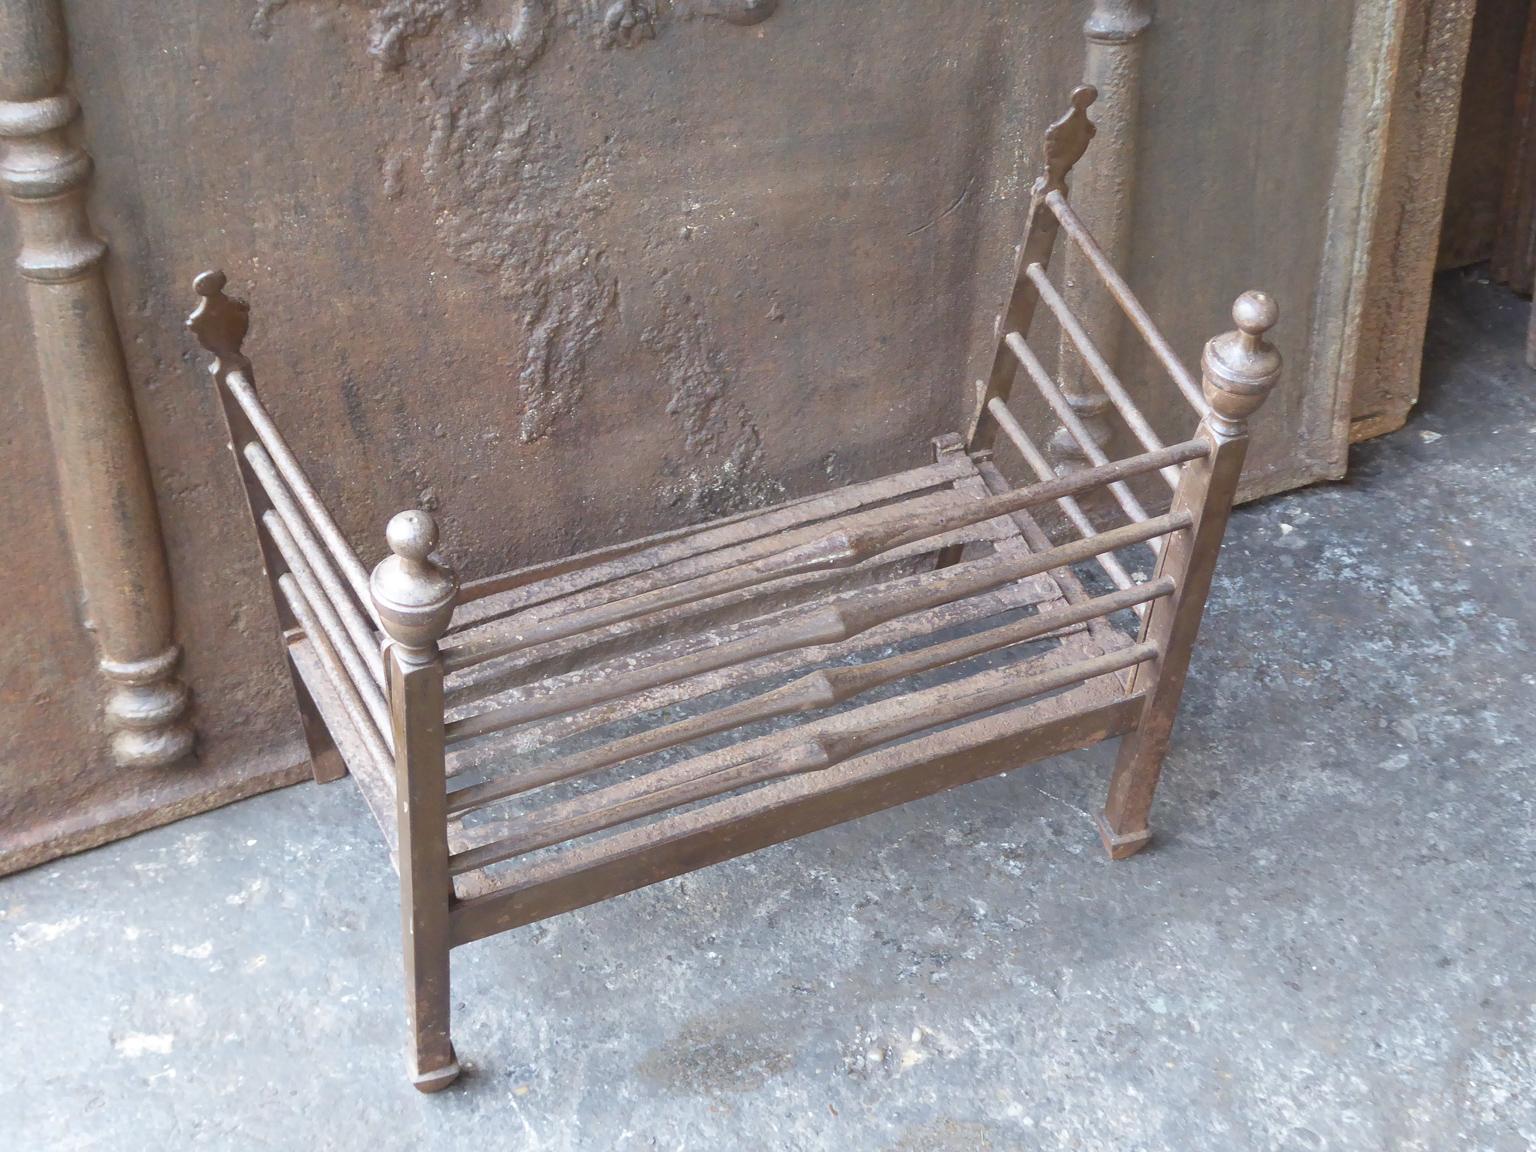 Forged 18th-19th Century Dutch Fireplace Grate or Fire Basket